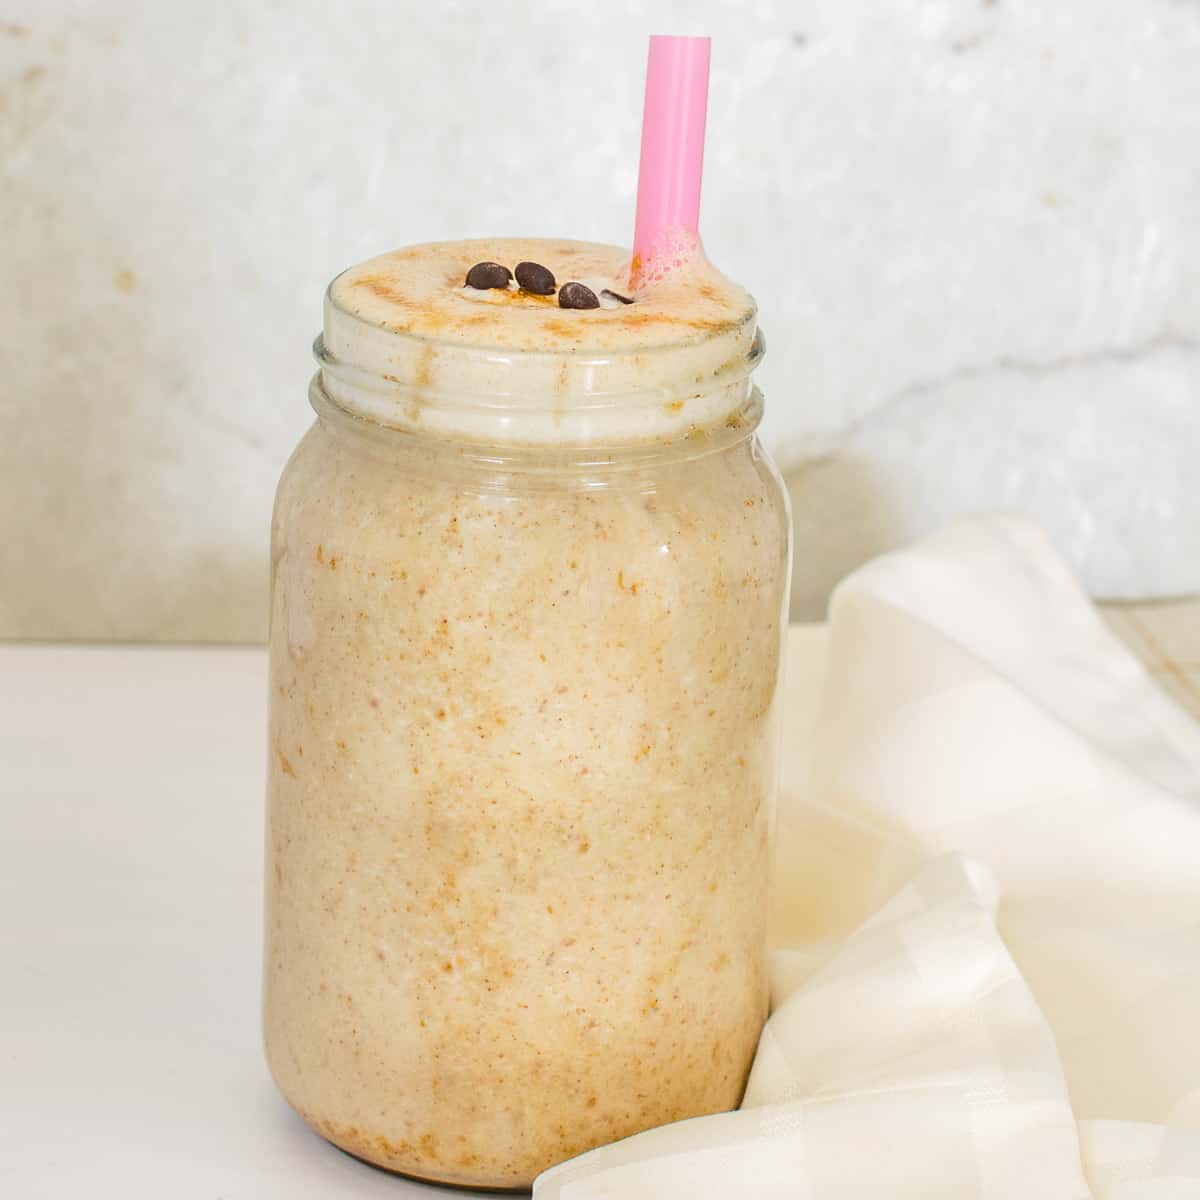 a front view of a tall glass filled with salted caramel protein shake and garnished.